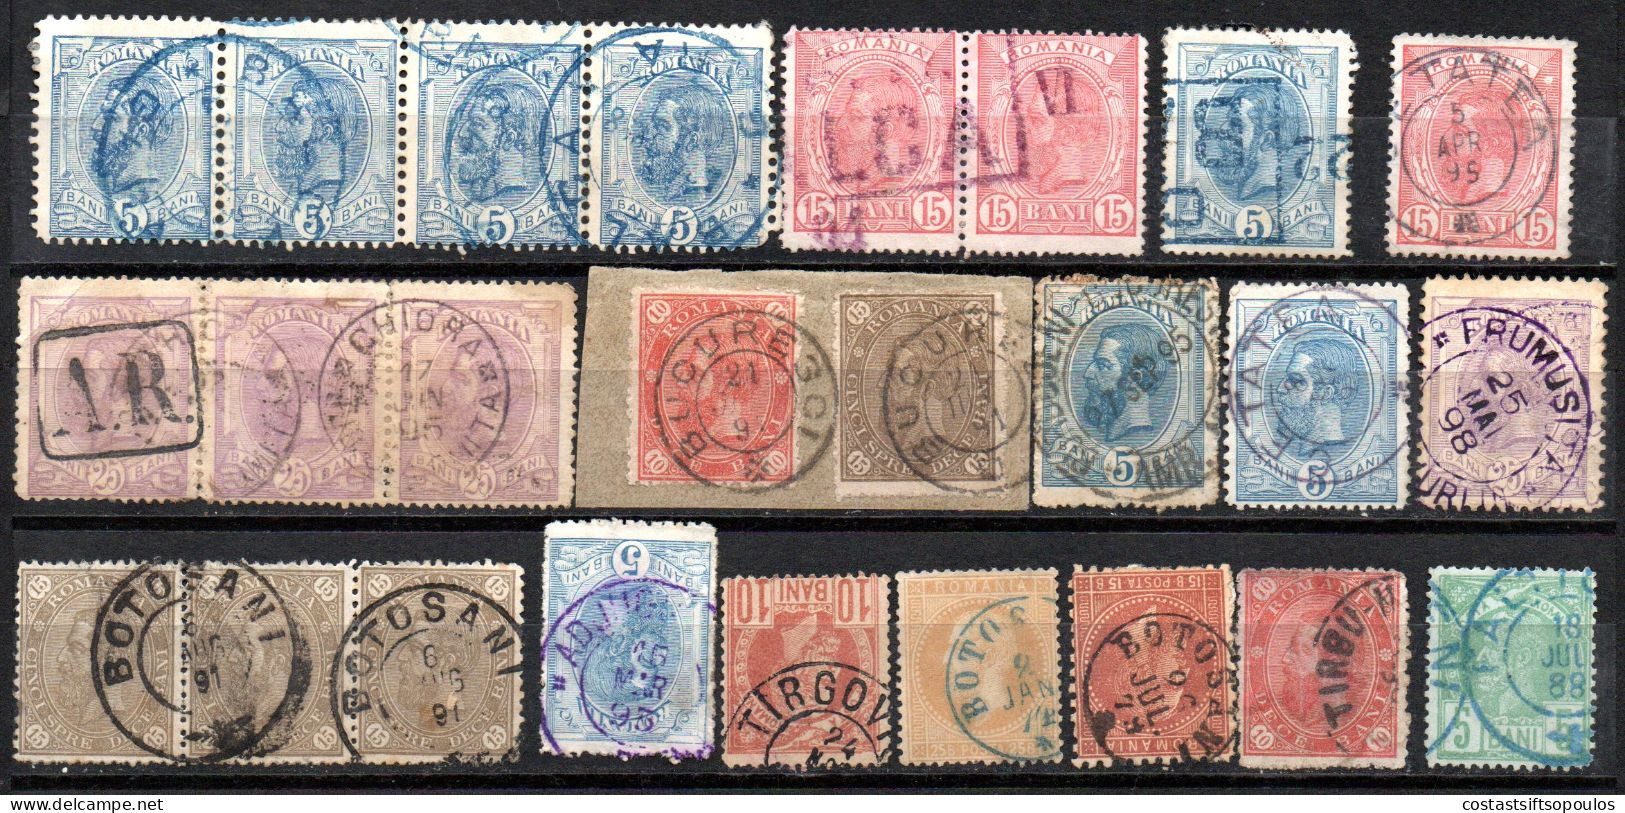 2670. ROMANIA CLASSIC STAMPS LOT, SOME INTERESTING POSTMARKS,FEW LIGHT FAULTS. - Usati